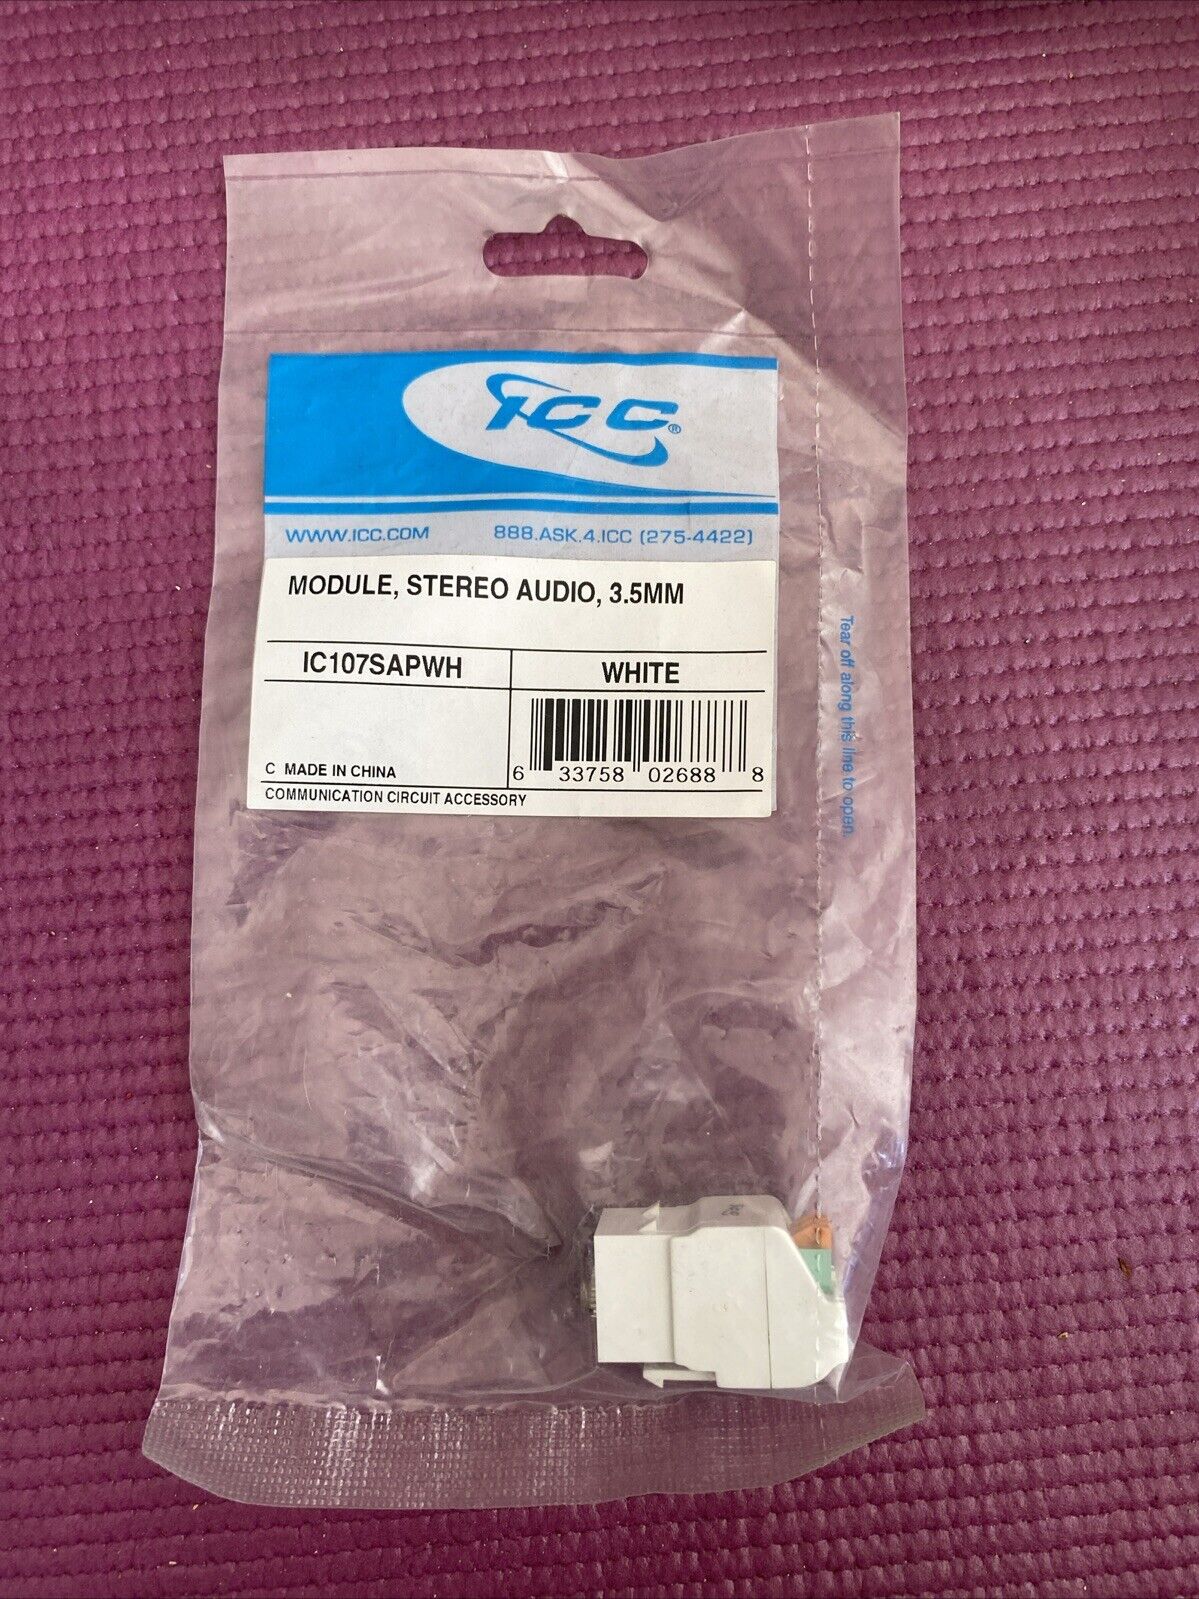 Icc Ic107sapwh Module, Stereo Audio, 3.5 Mm, White 8 Count